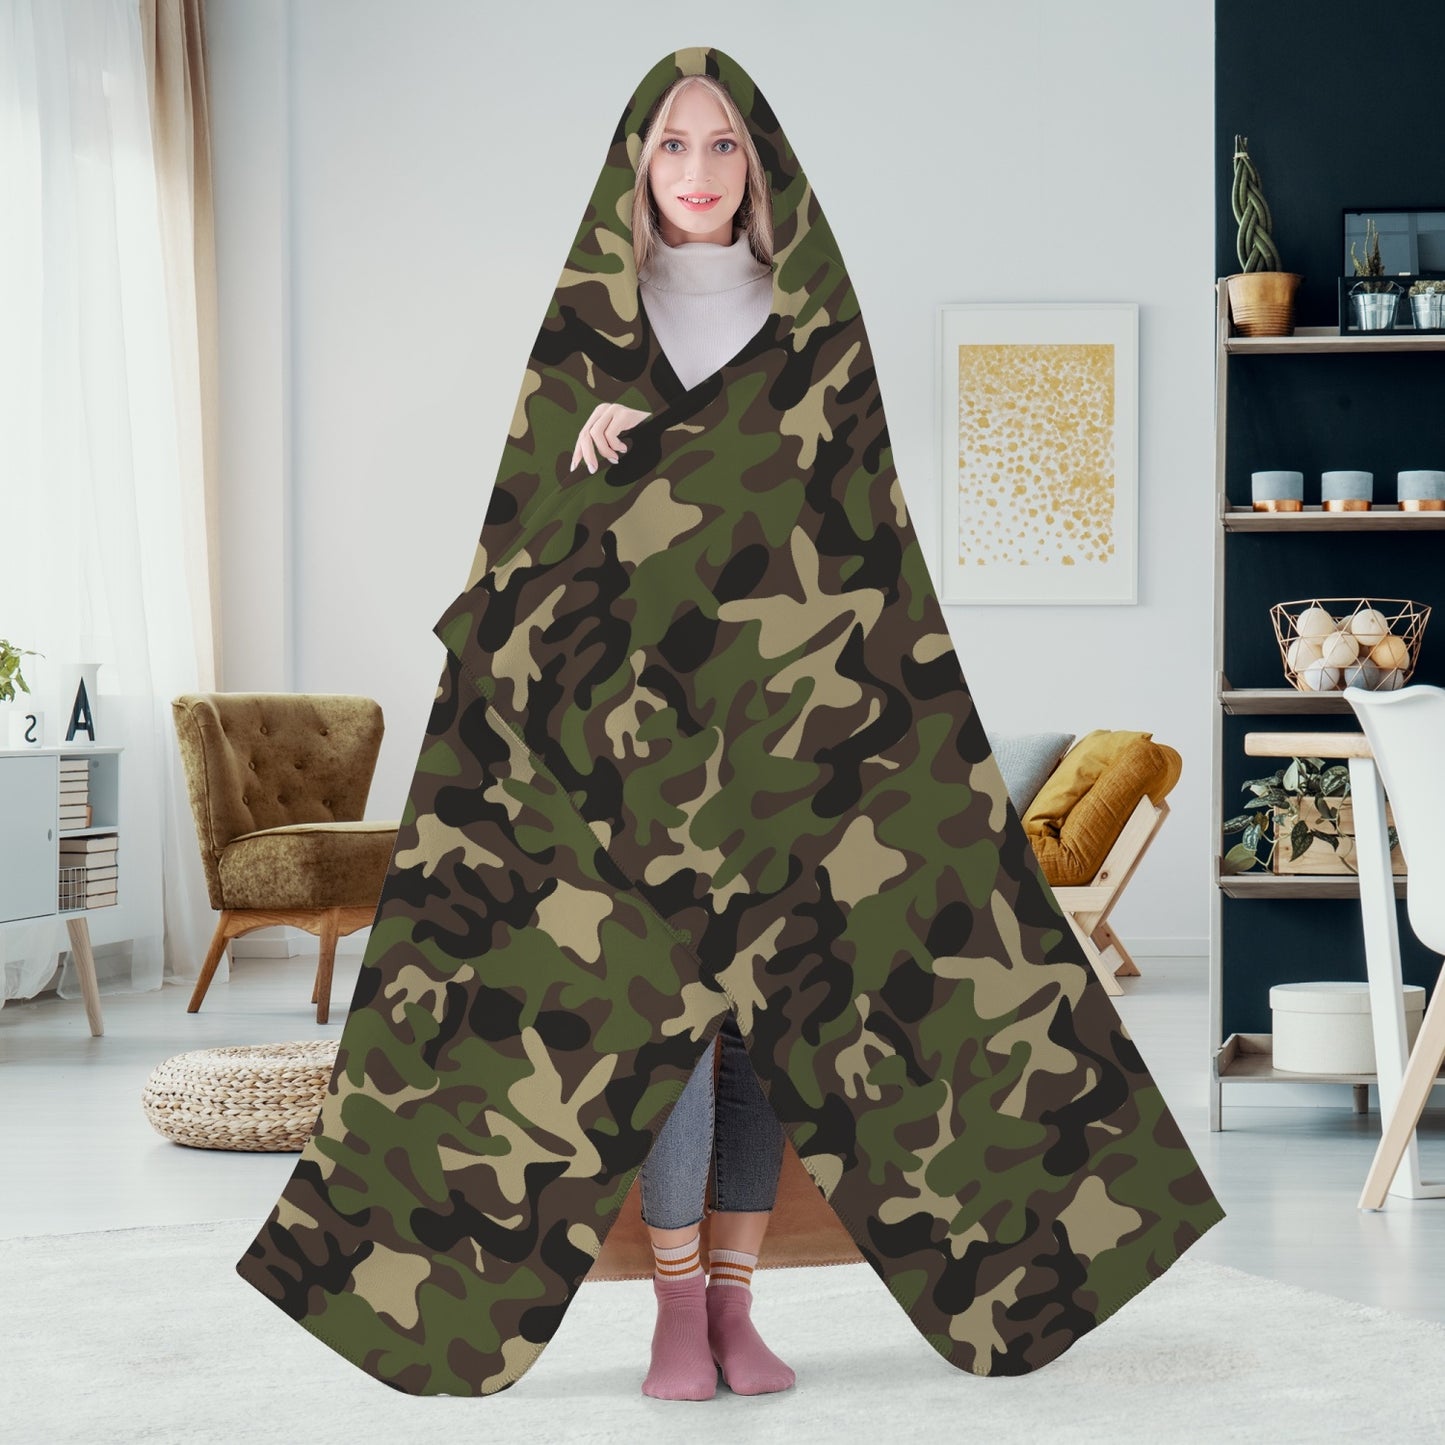 Camo Hooded Blanket, Green Camouflage Sherpa Fleece Soft Fluffy Cozy Warm Adult Men Women Kids Large Wearable with Hood Gift Starcove Fashion